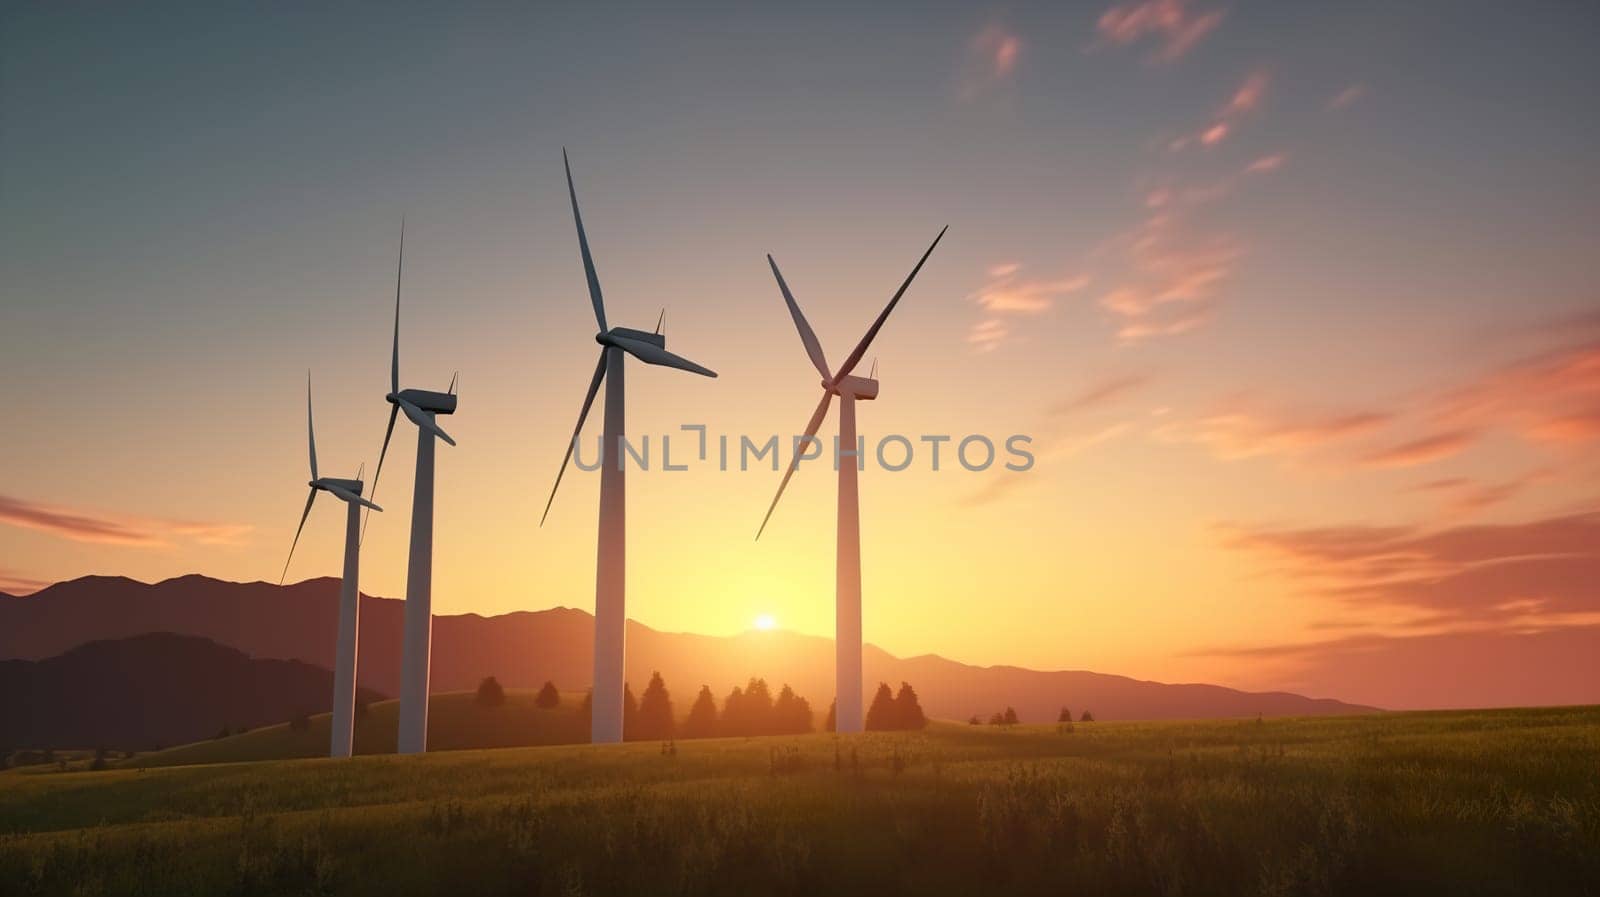 wind turbines in the rising sun. renewable energy with wind turbines